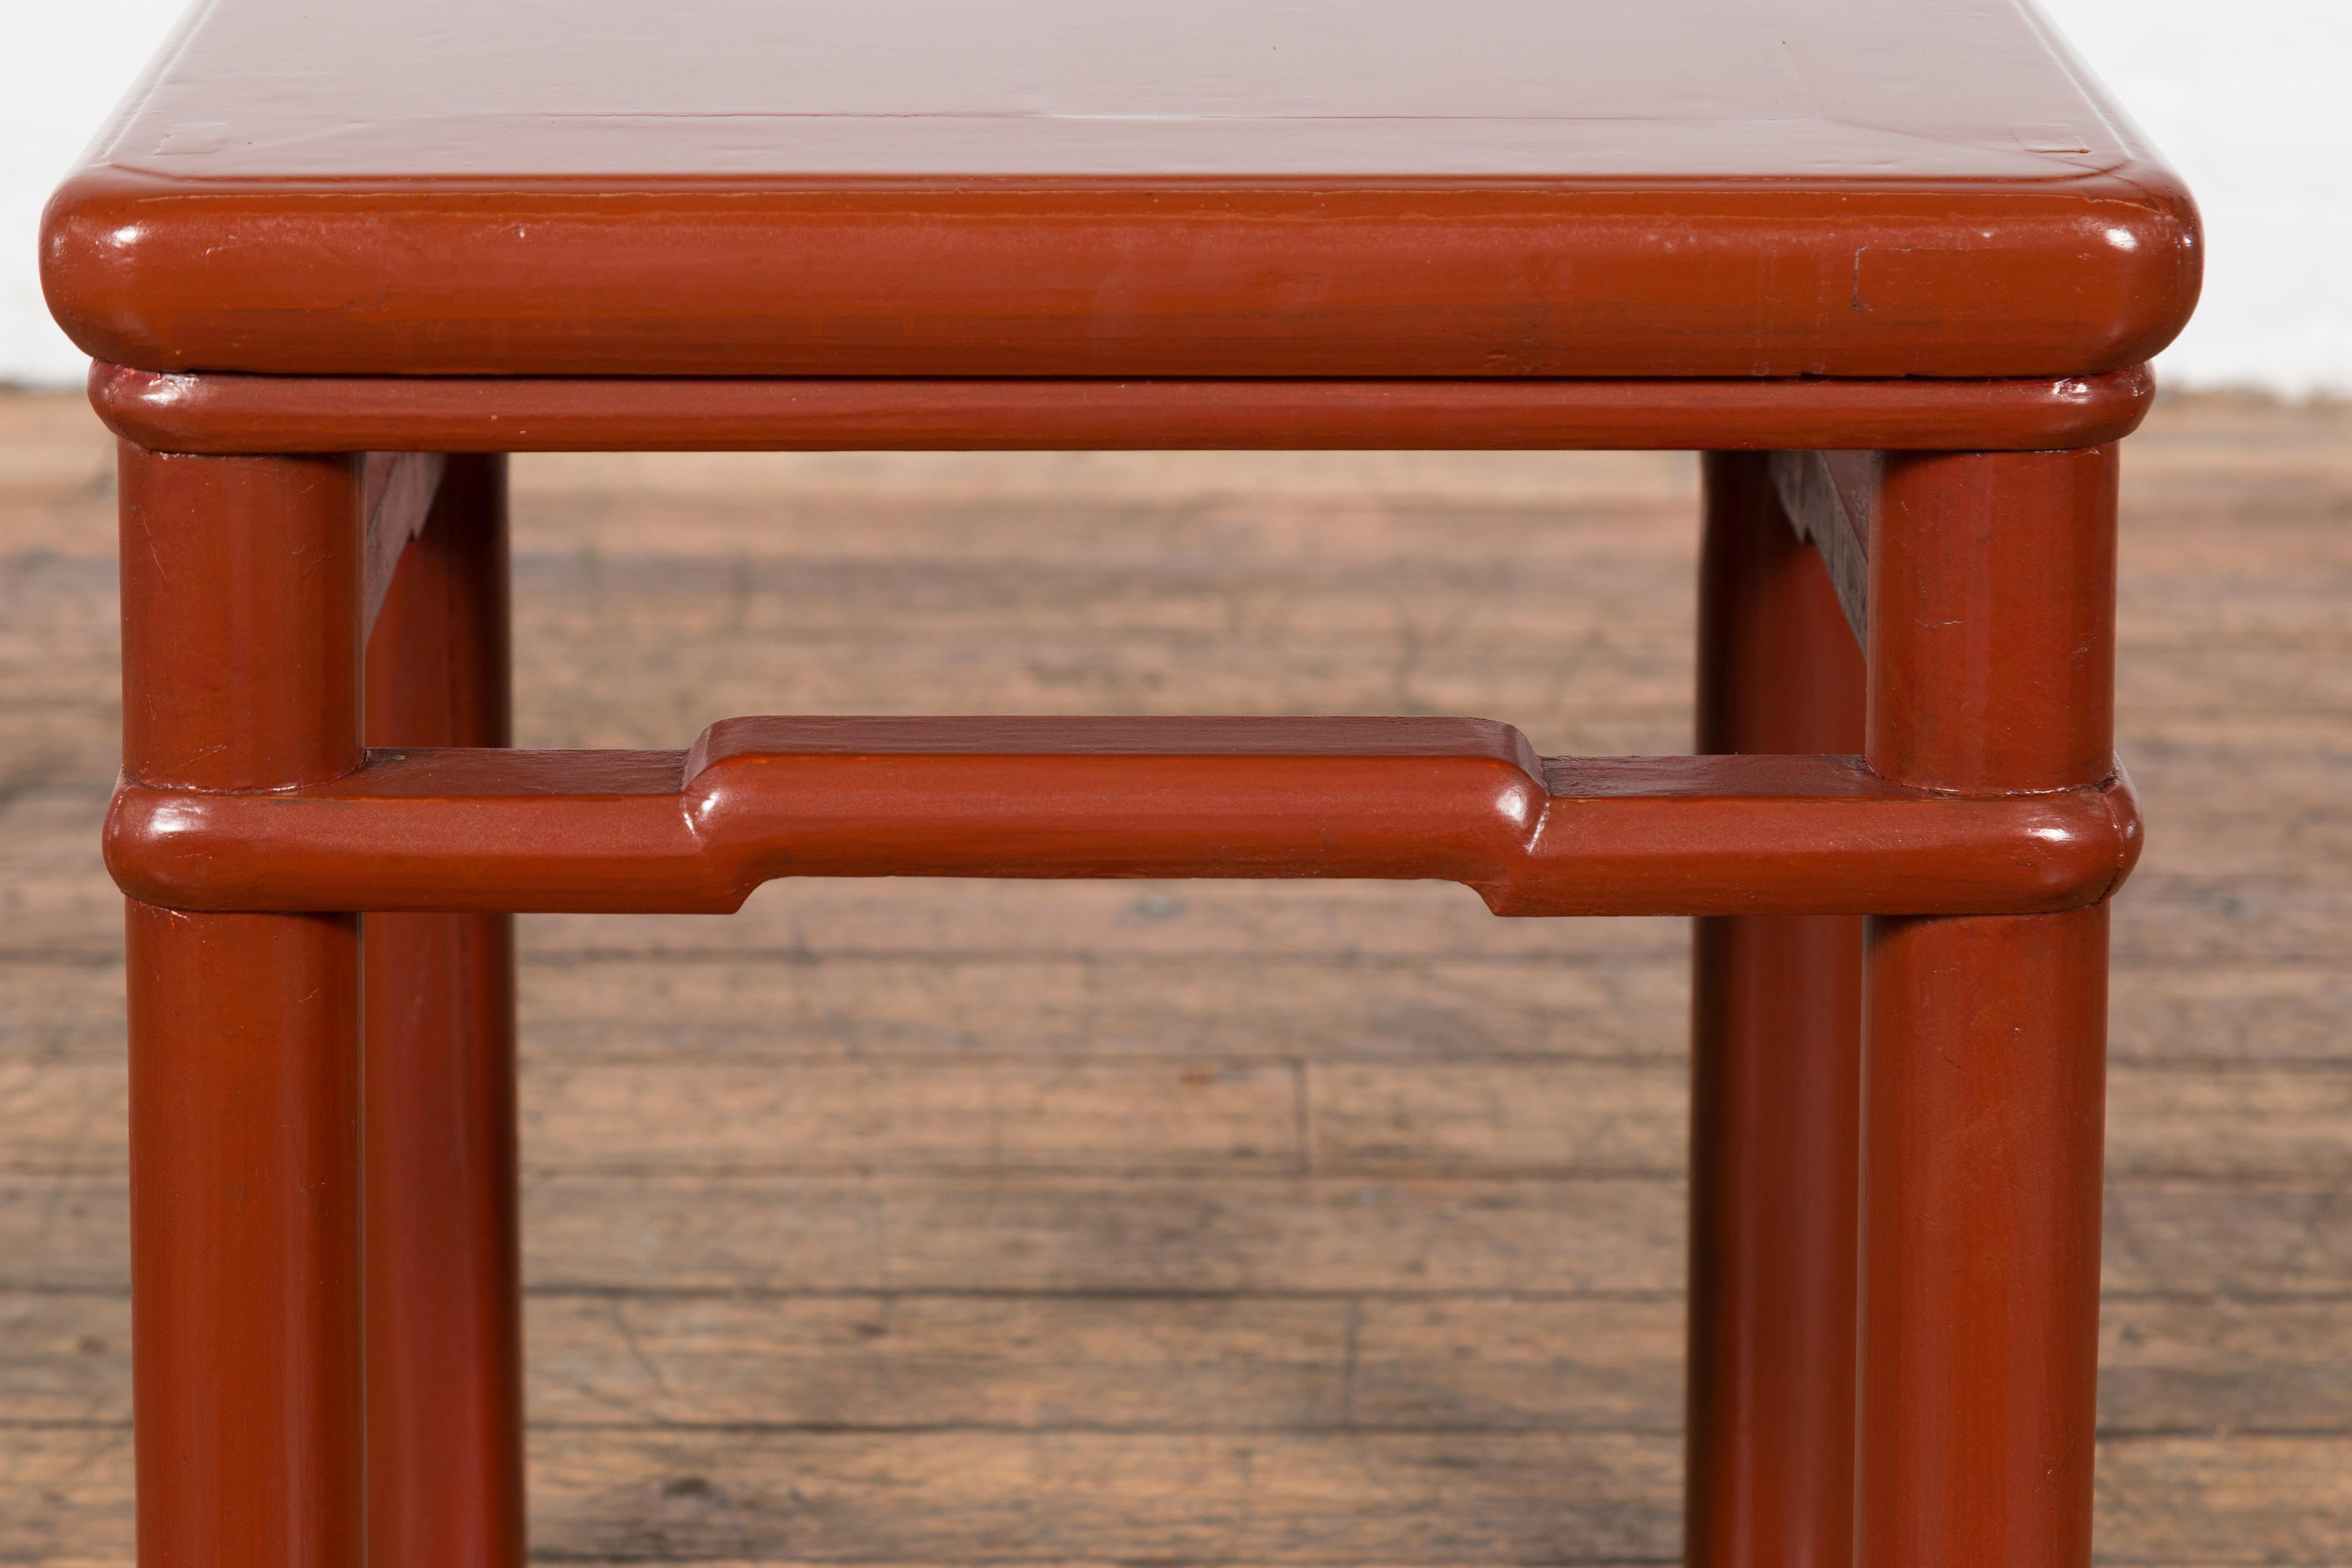 Chinese 1900s Qing Dynasty Red Lacquer Stool or Table with Humpback Stretchers For Sale 3